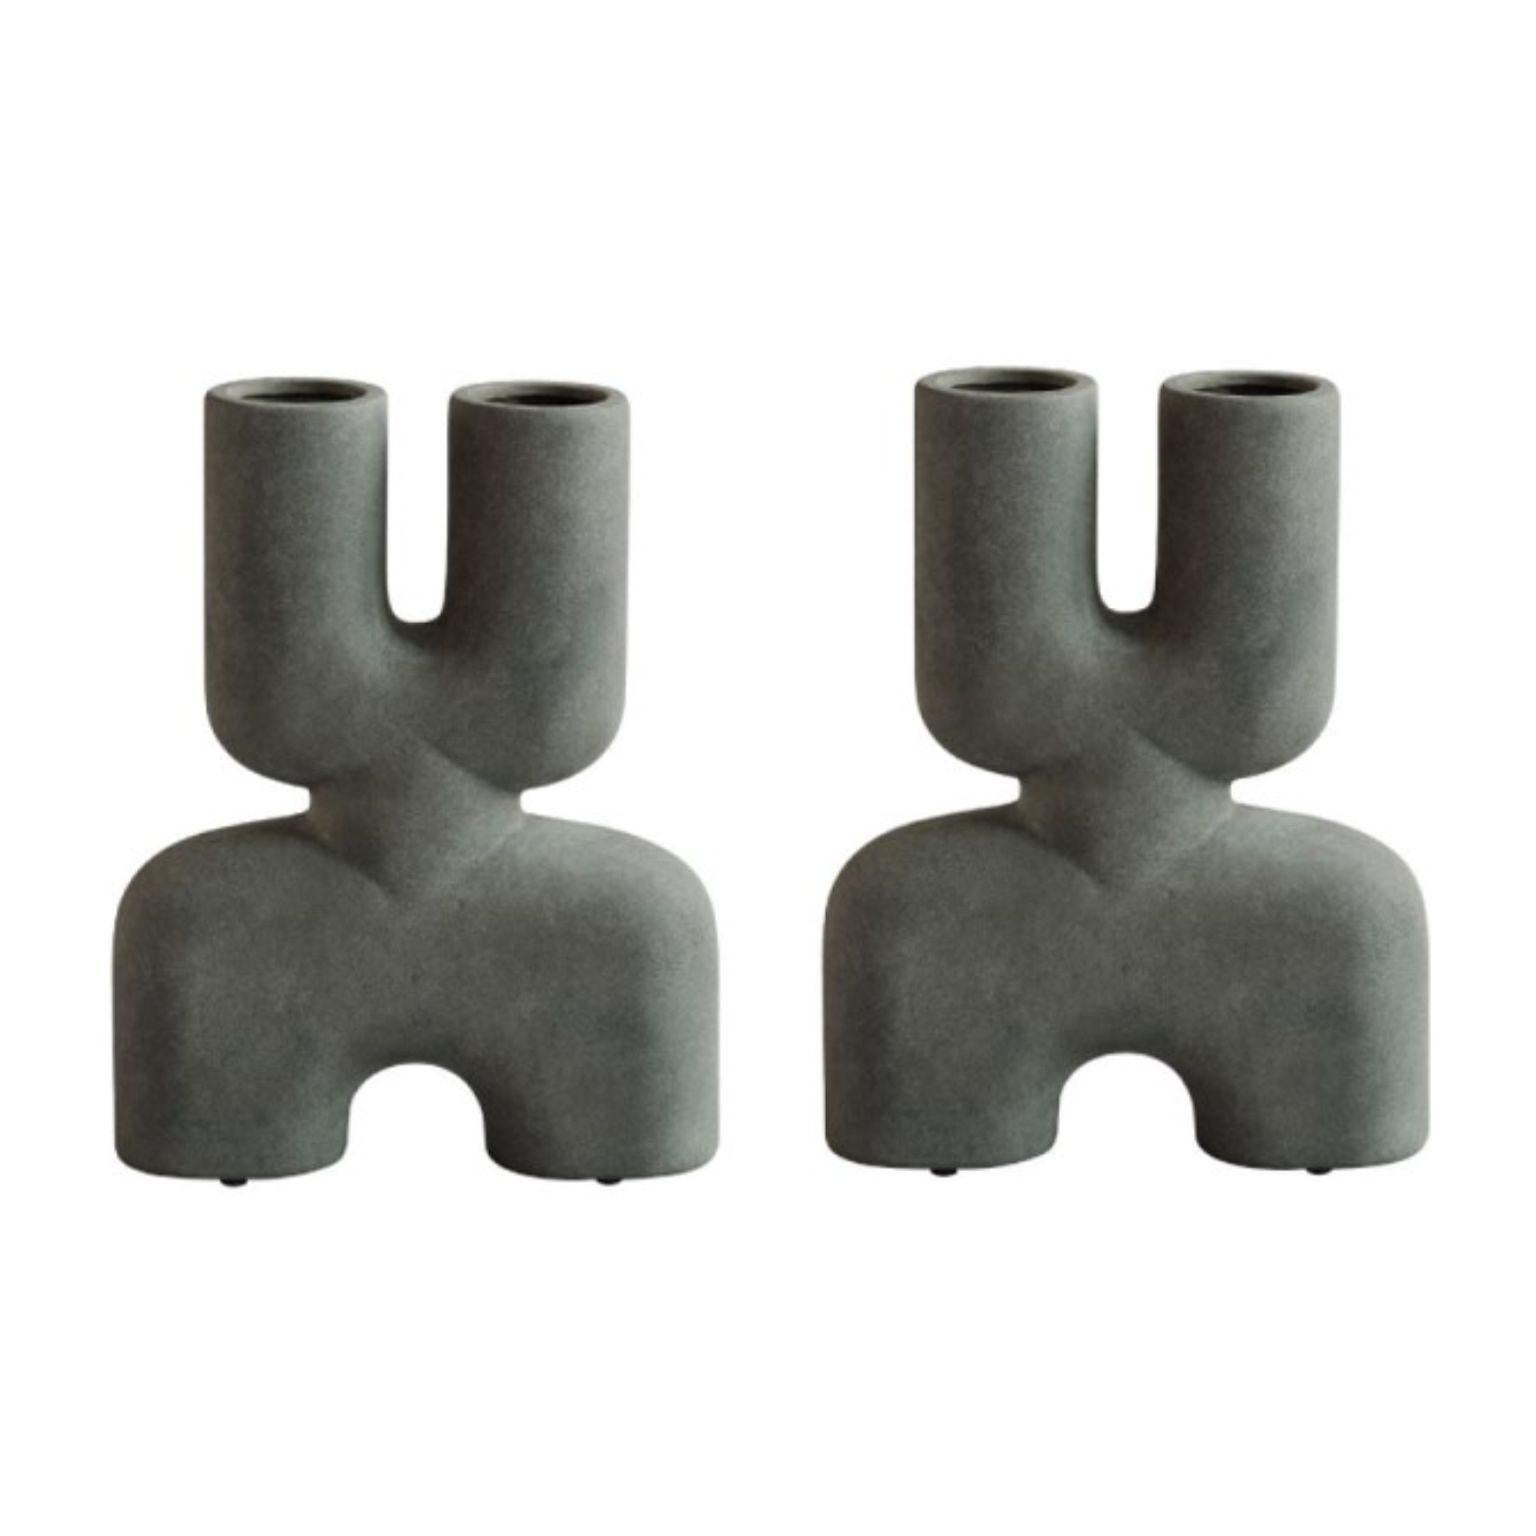 Set of 2 dark grey Cobra double mini by 101 Copenhagen
Designed by Kristian Sofus Hansen & Tommy Hyldahl
Dimensions: L 22 / W 6,5 / H 28 cm
Materials: Ceramic

A tribute to the Cobra Arts Movement of the 1960s, the collection is the epitome of